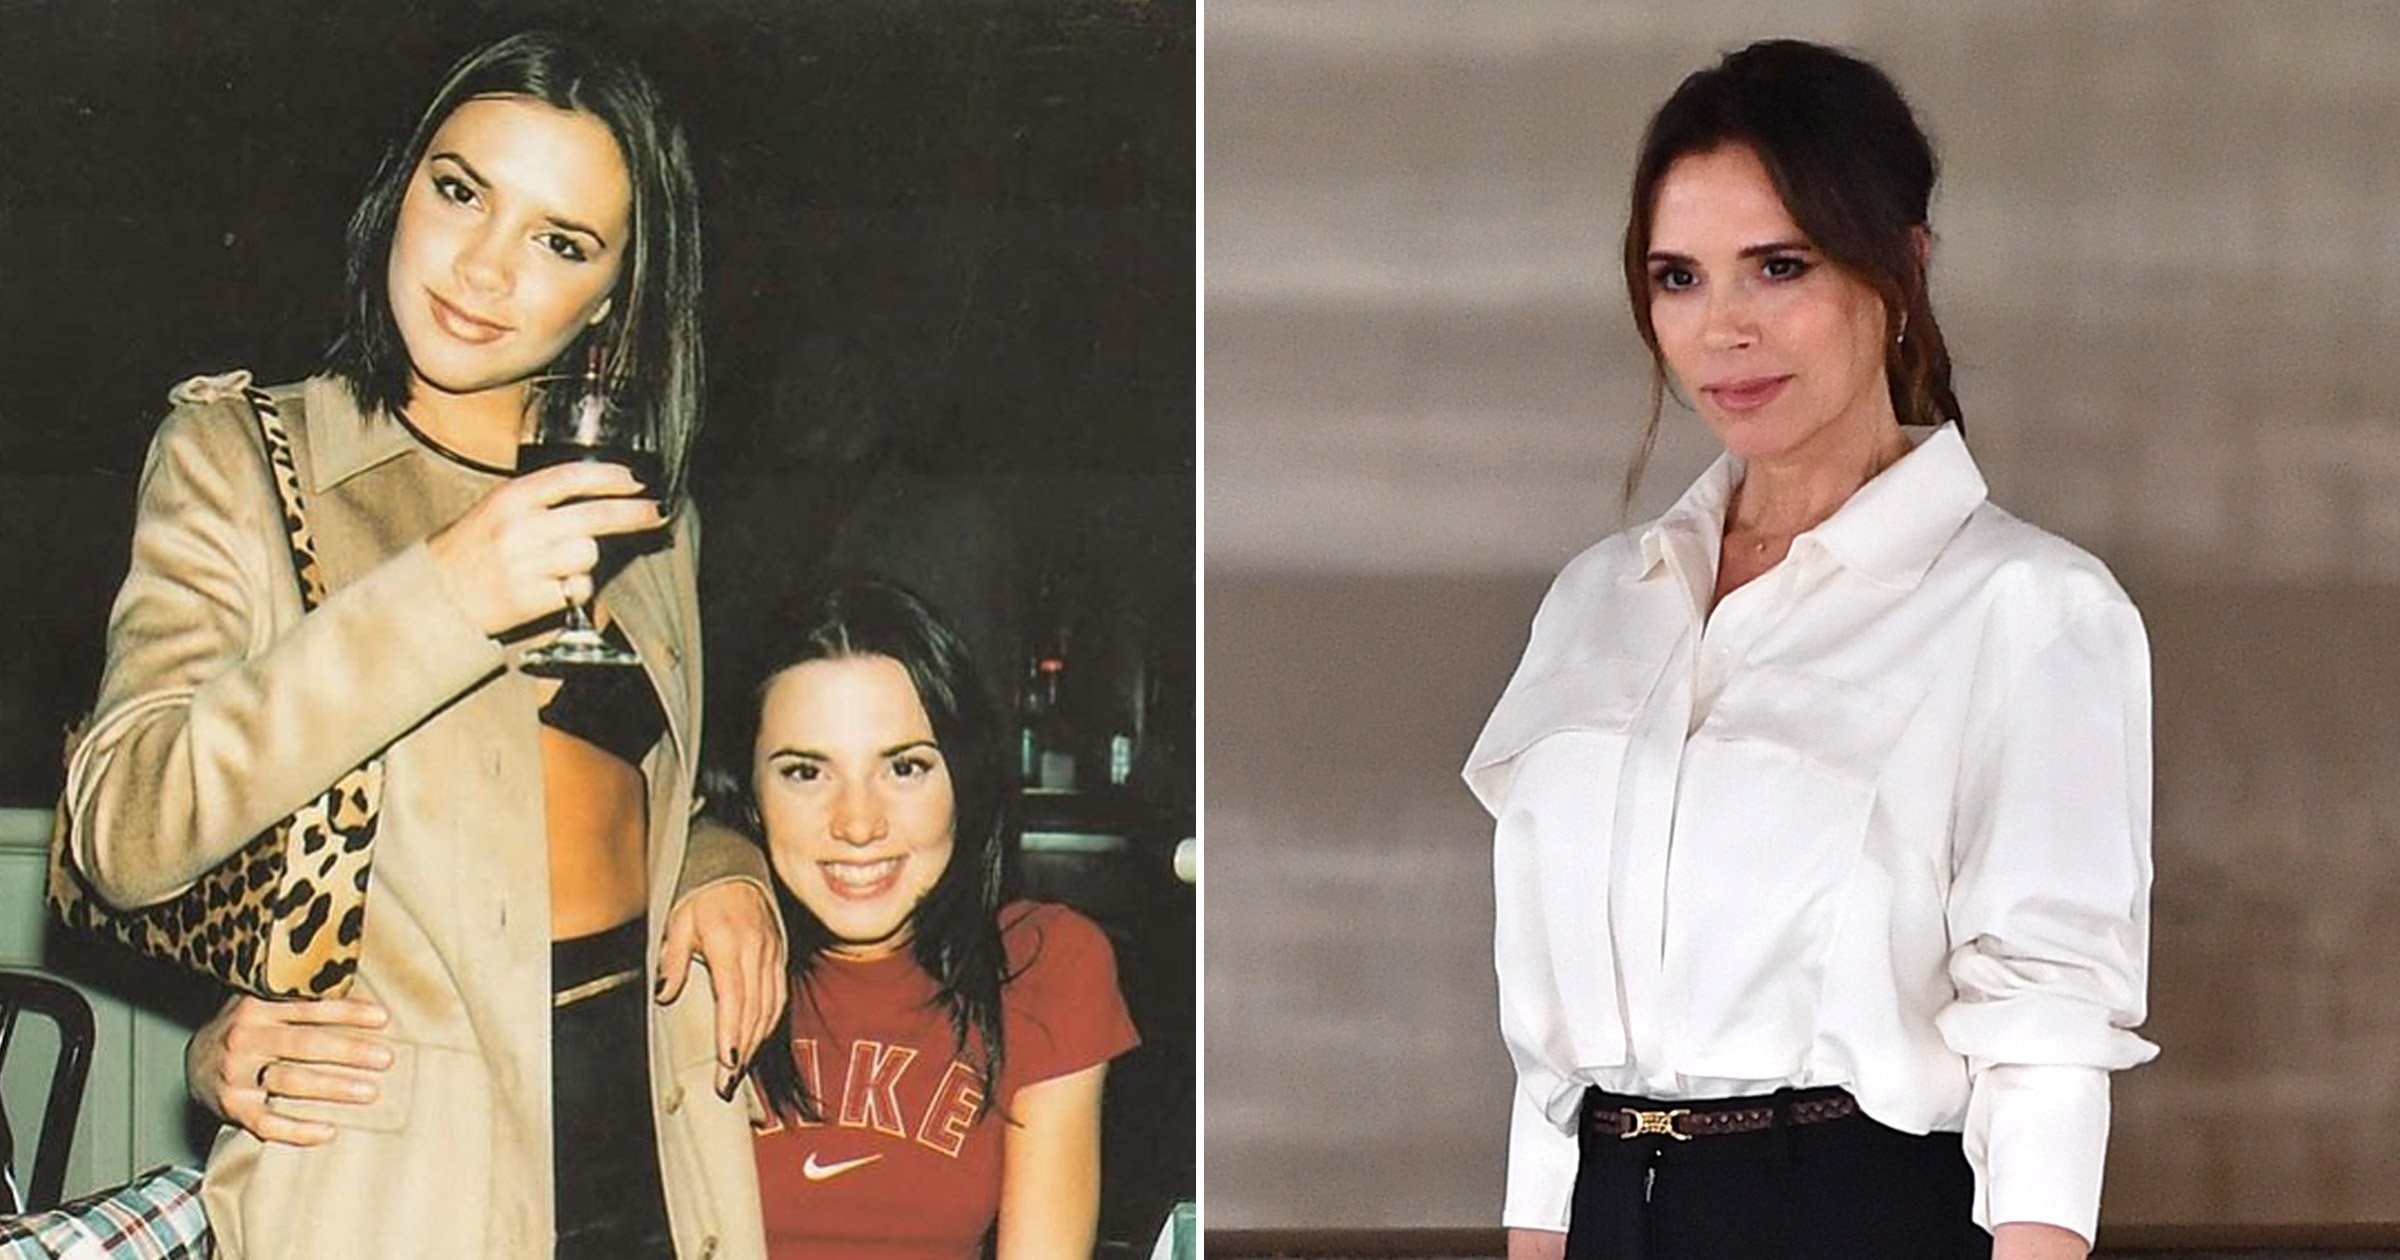 Victoria Beckham shares epic ’90s throwback to mark Spice Girls star Mel C’s birthday and nostalgia is real